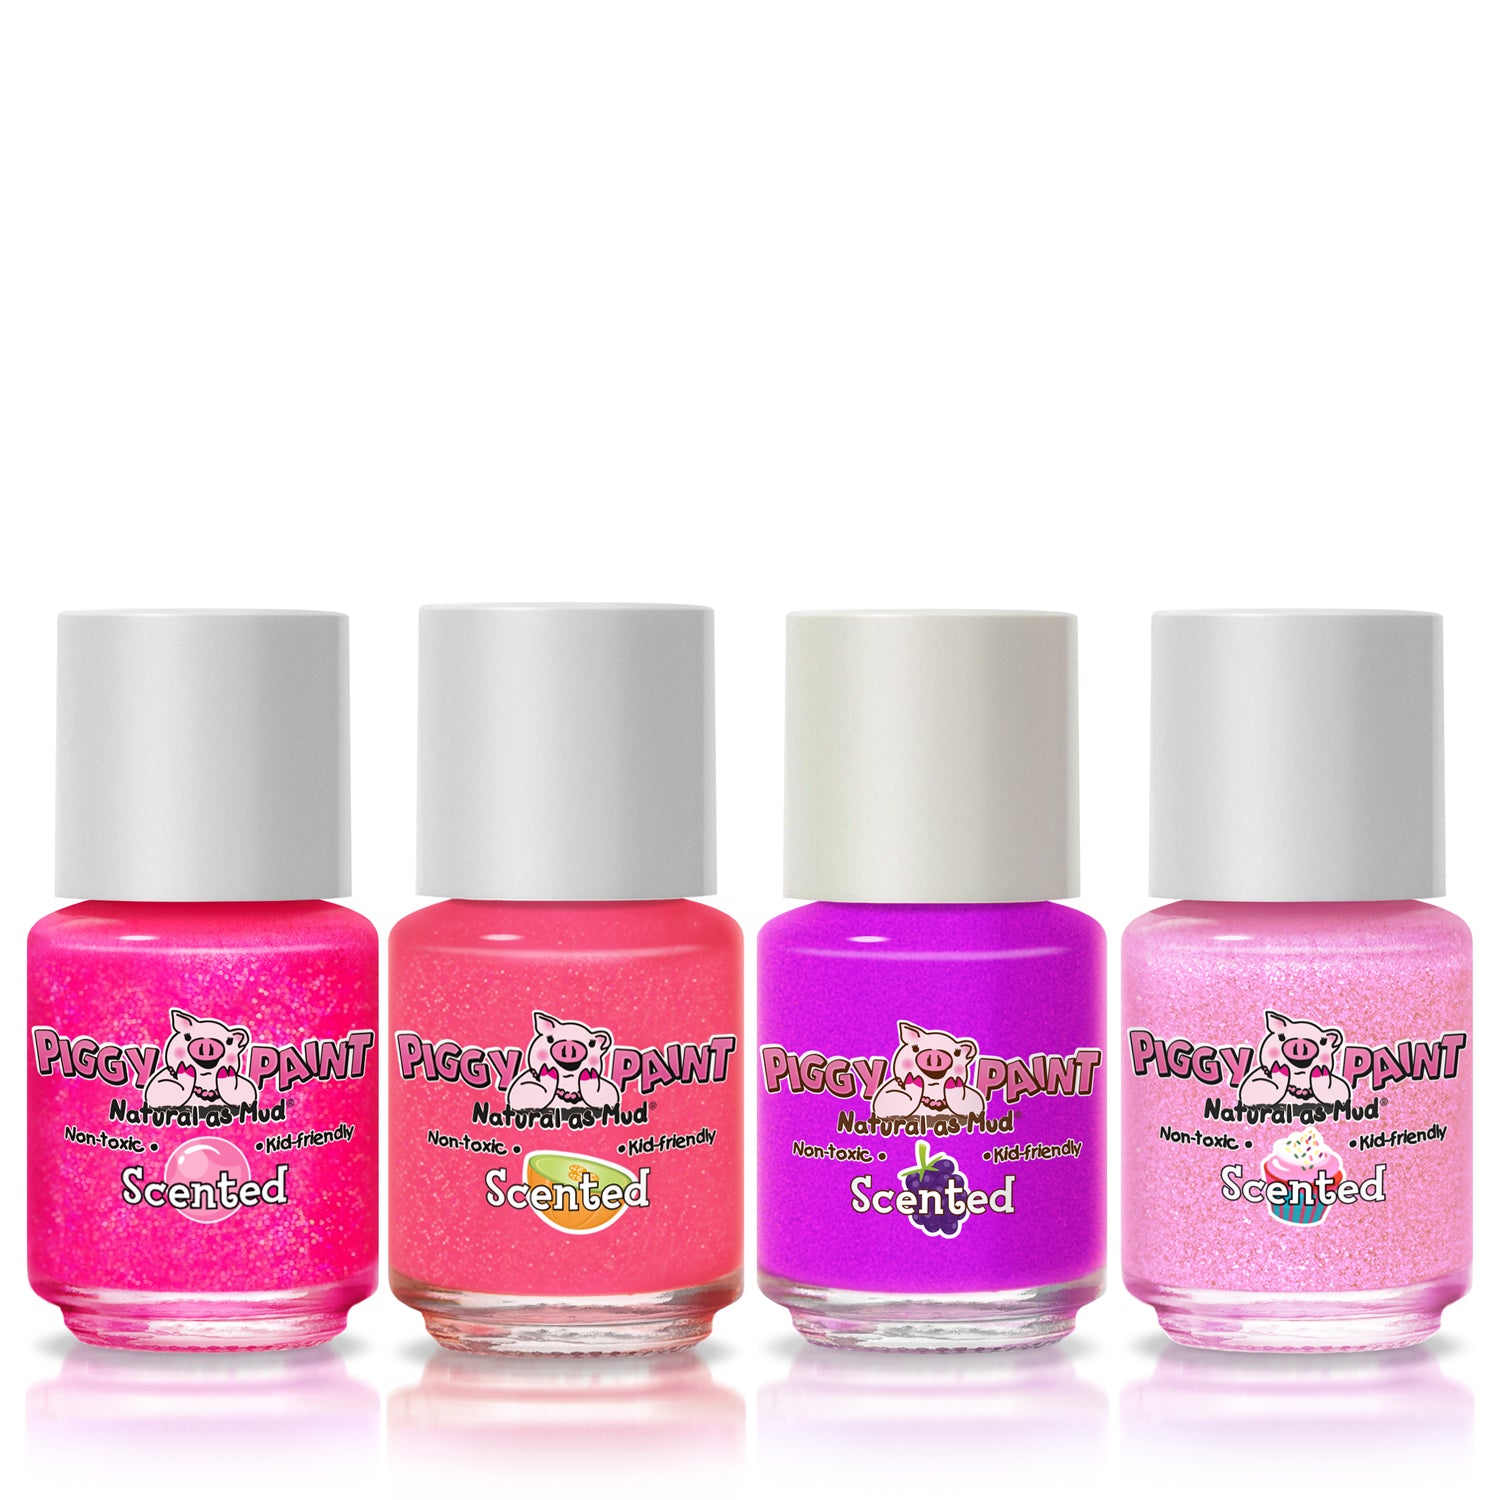 Piggy Paint - Four Pack Nail Polish LOL, Sea-Quin, Glamour Girl, & Basecoat + Topcoat (2-in-1)